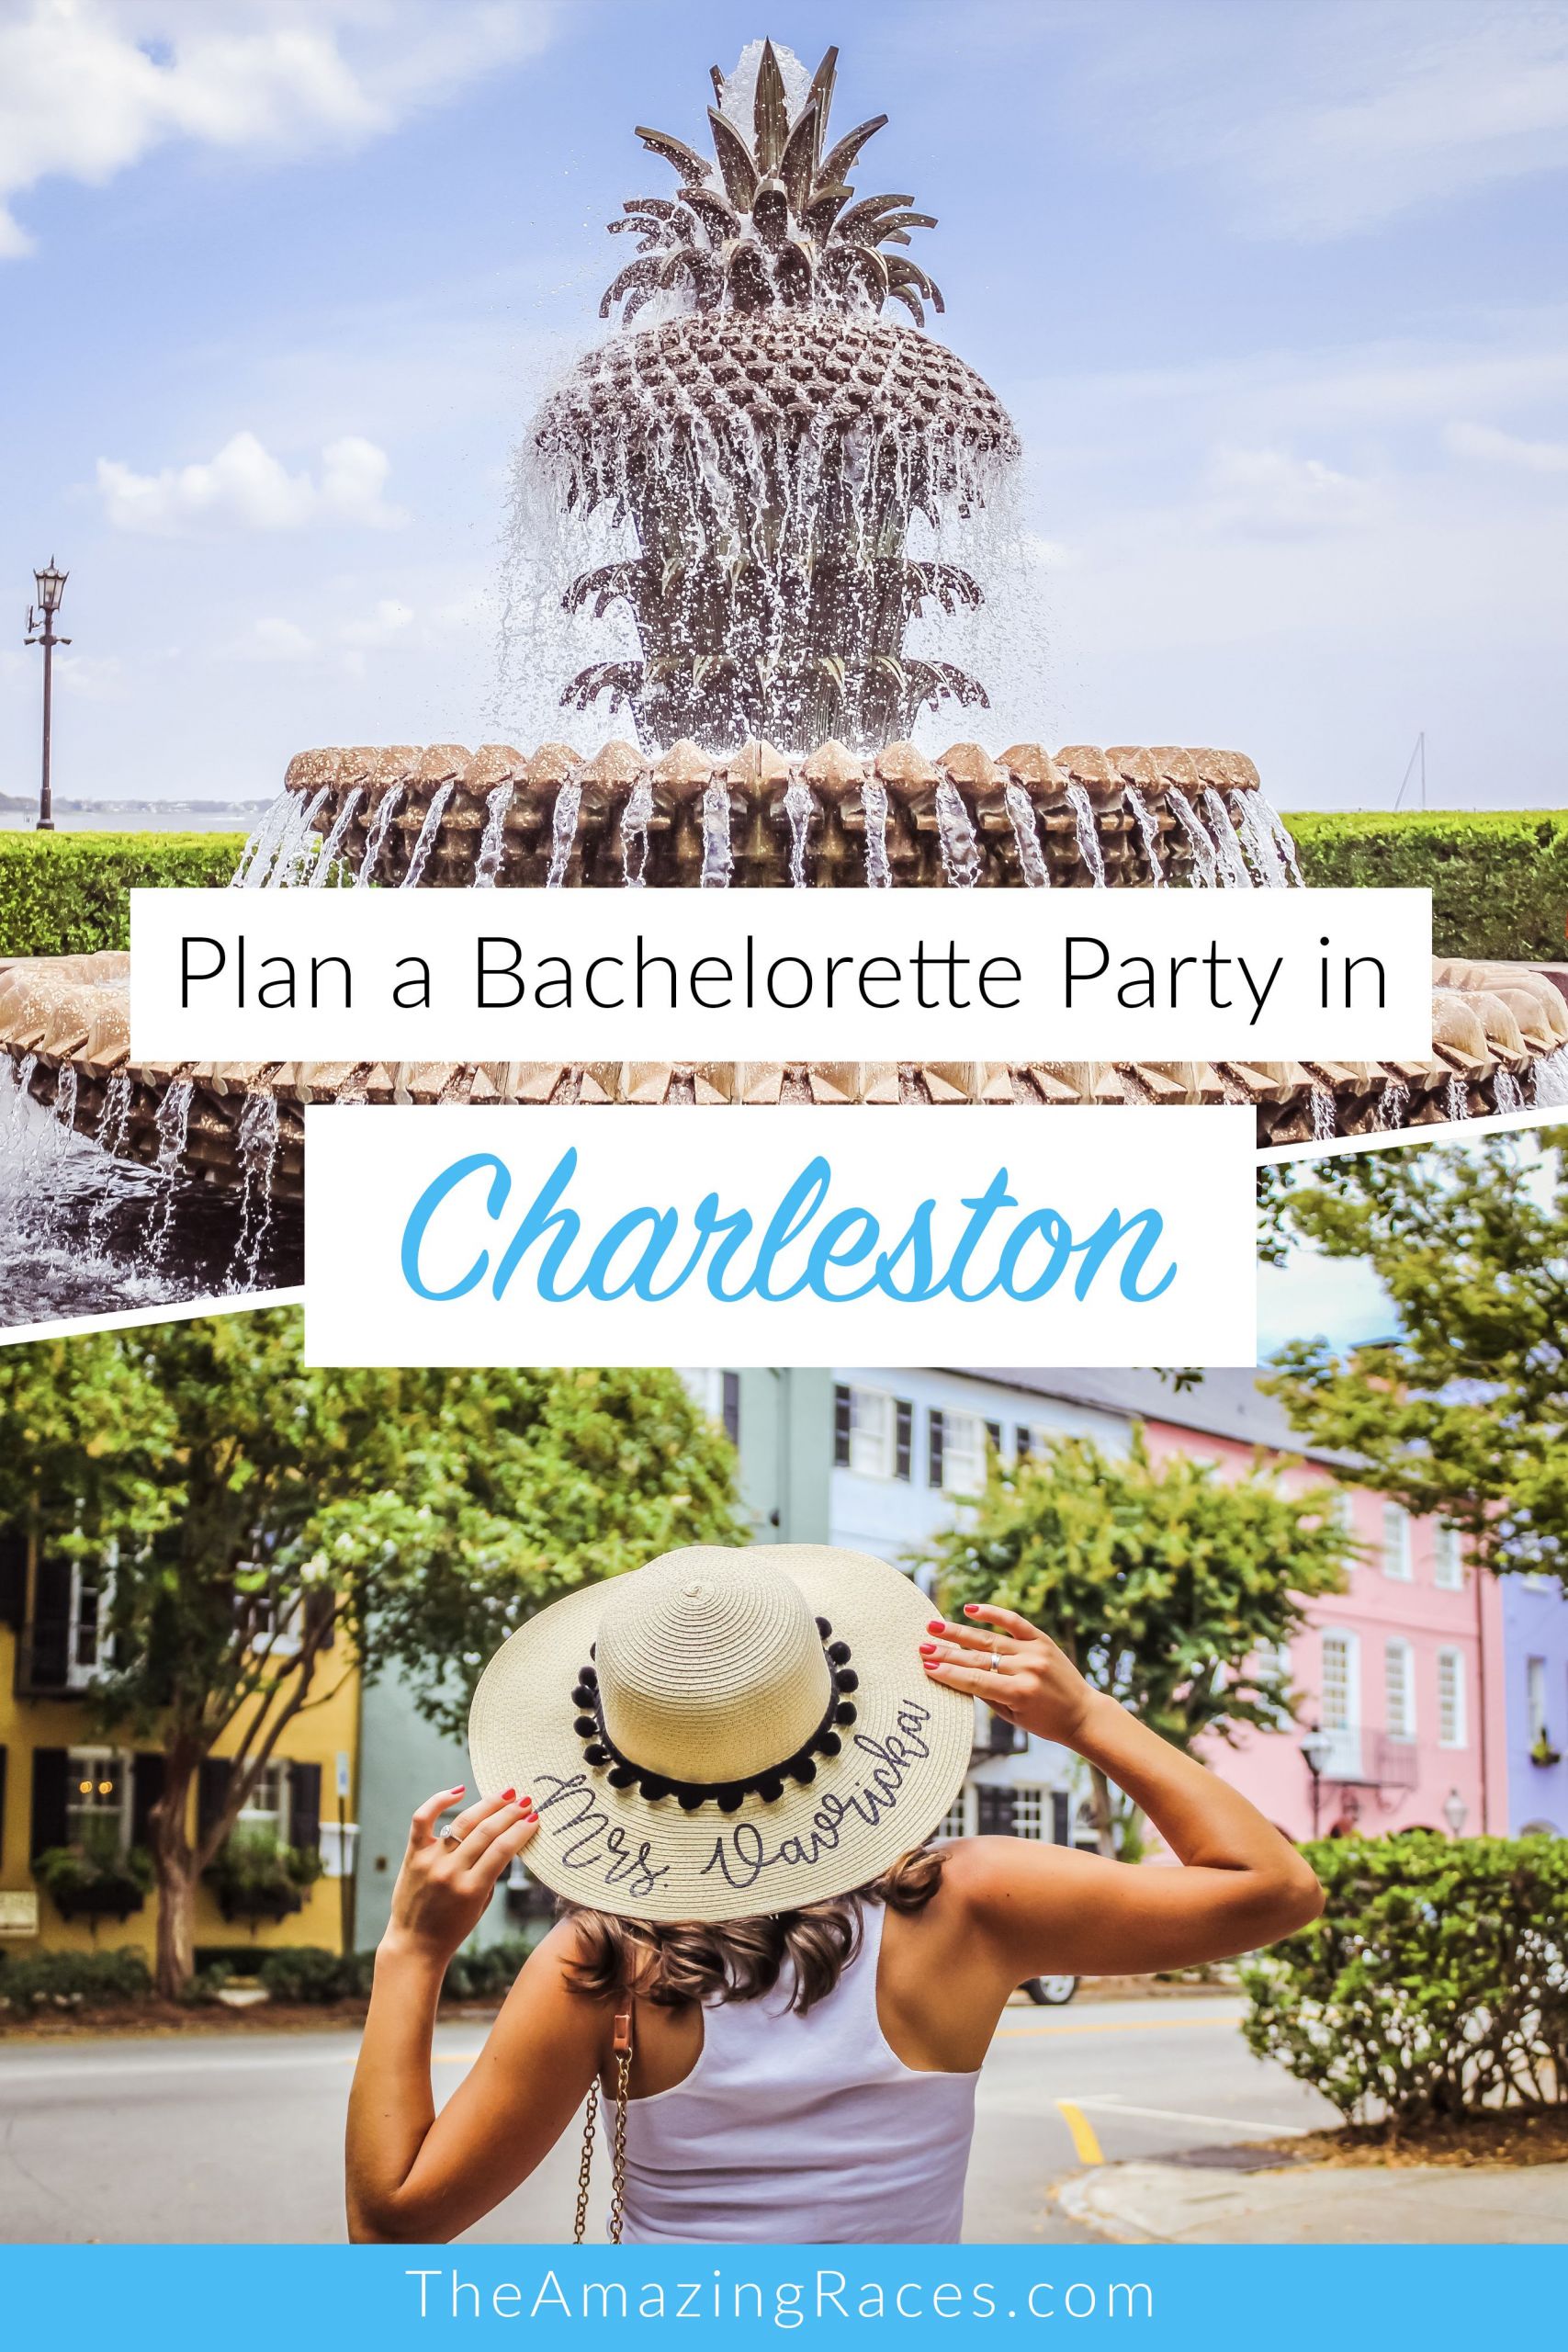 Bachelorette Party Ideas In South Myrtle Beach Sc
 If you re planning a bachelorette party in Charleston